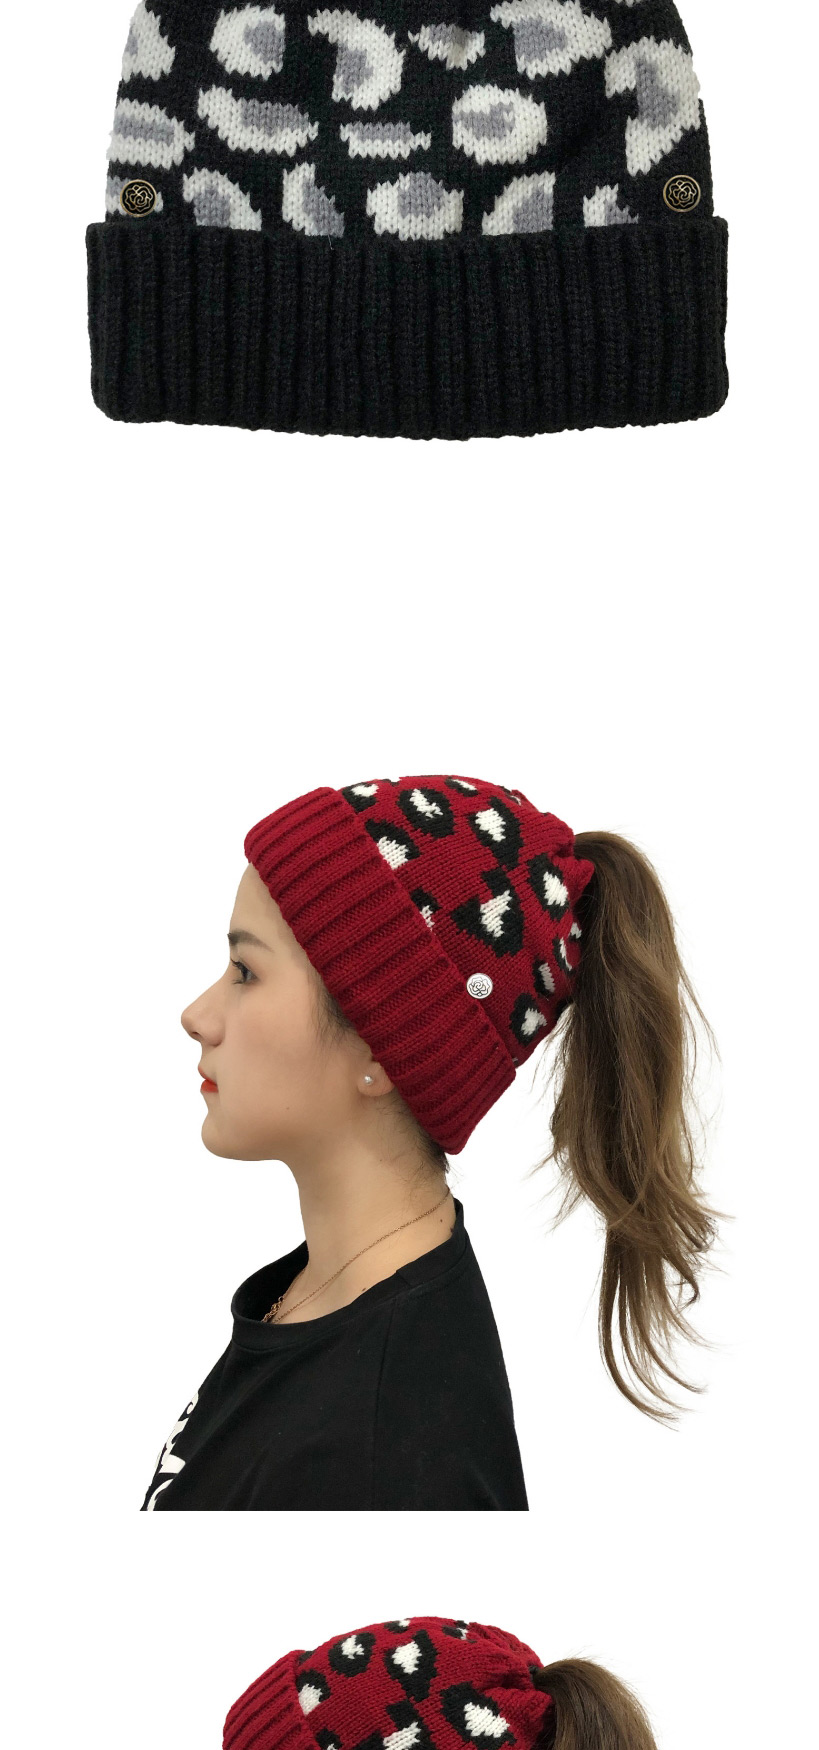 Fashion Camel Button Leopard Jacquard Knitted Beanie,Knitting Wool Hats